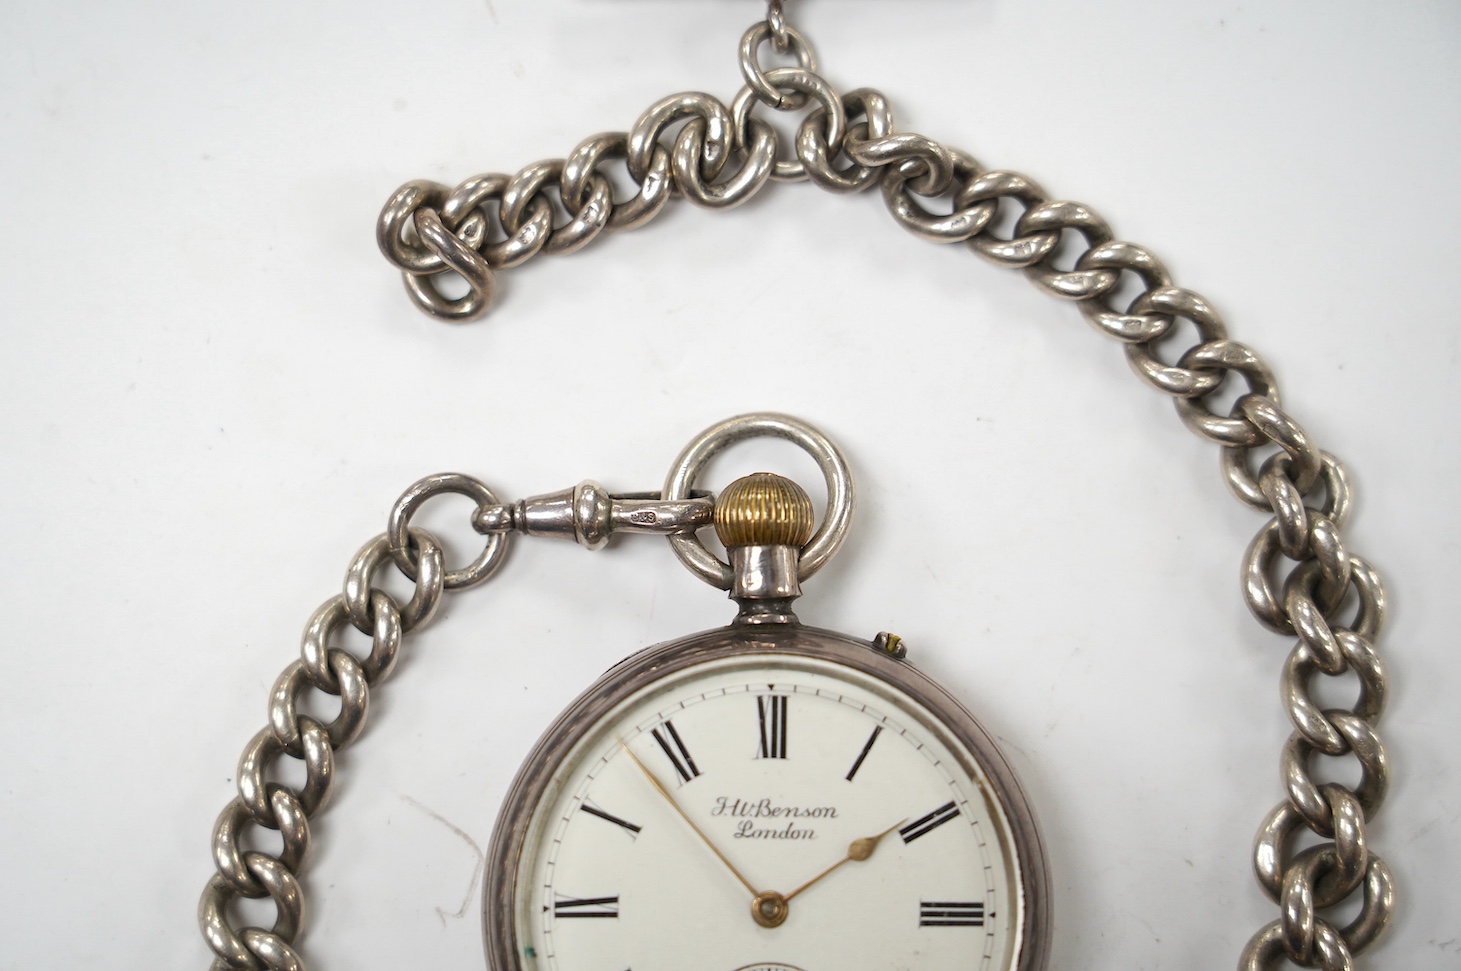 A late Victorian silver open face pocket watch, by J.W. Benson, with Roman dial and subsidiary seconds, together with a silver albert. Condition - poor to fair